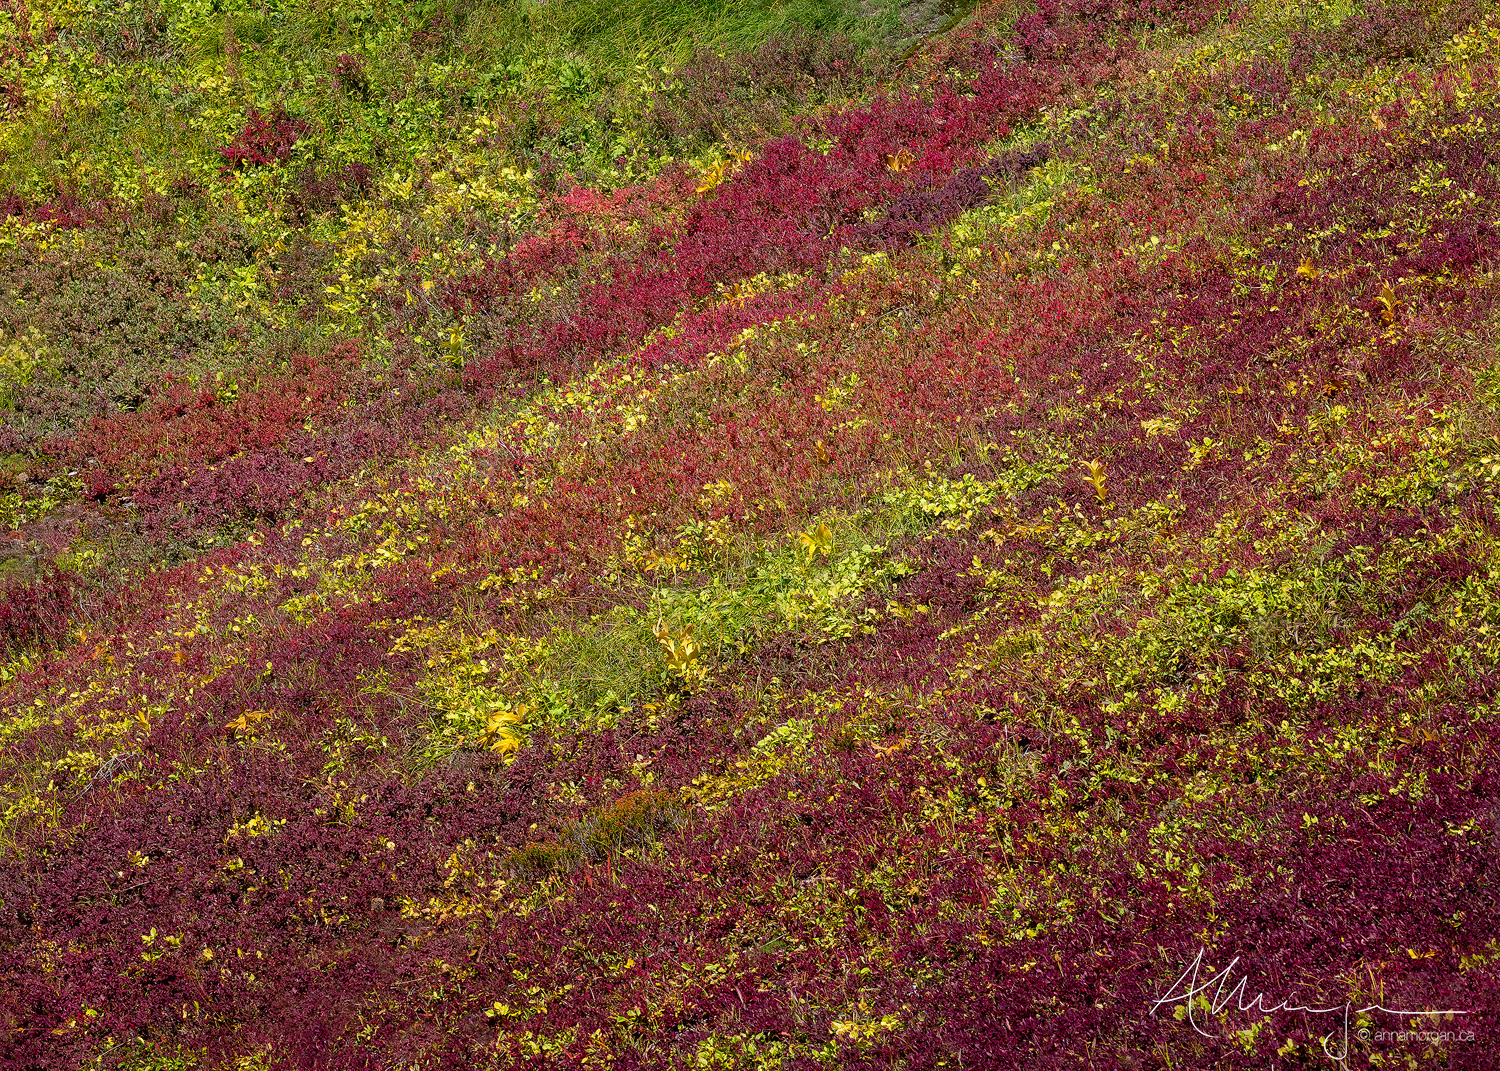 Scarlet and Gold colours blanketthe slopes of the mountains in the North Cascades National Park in Autumn